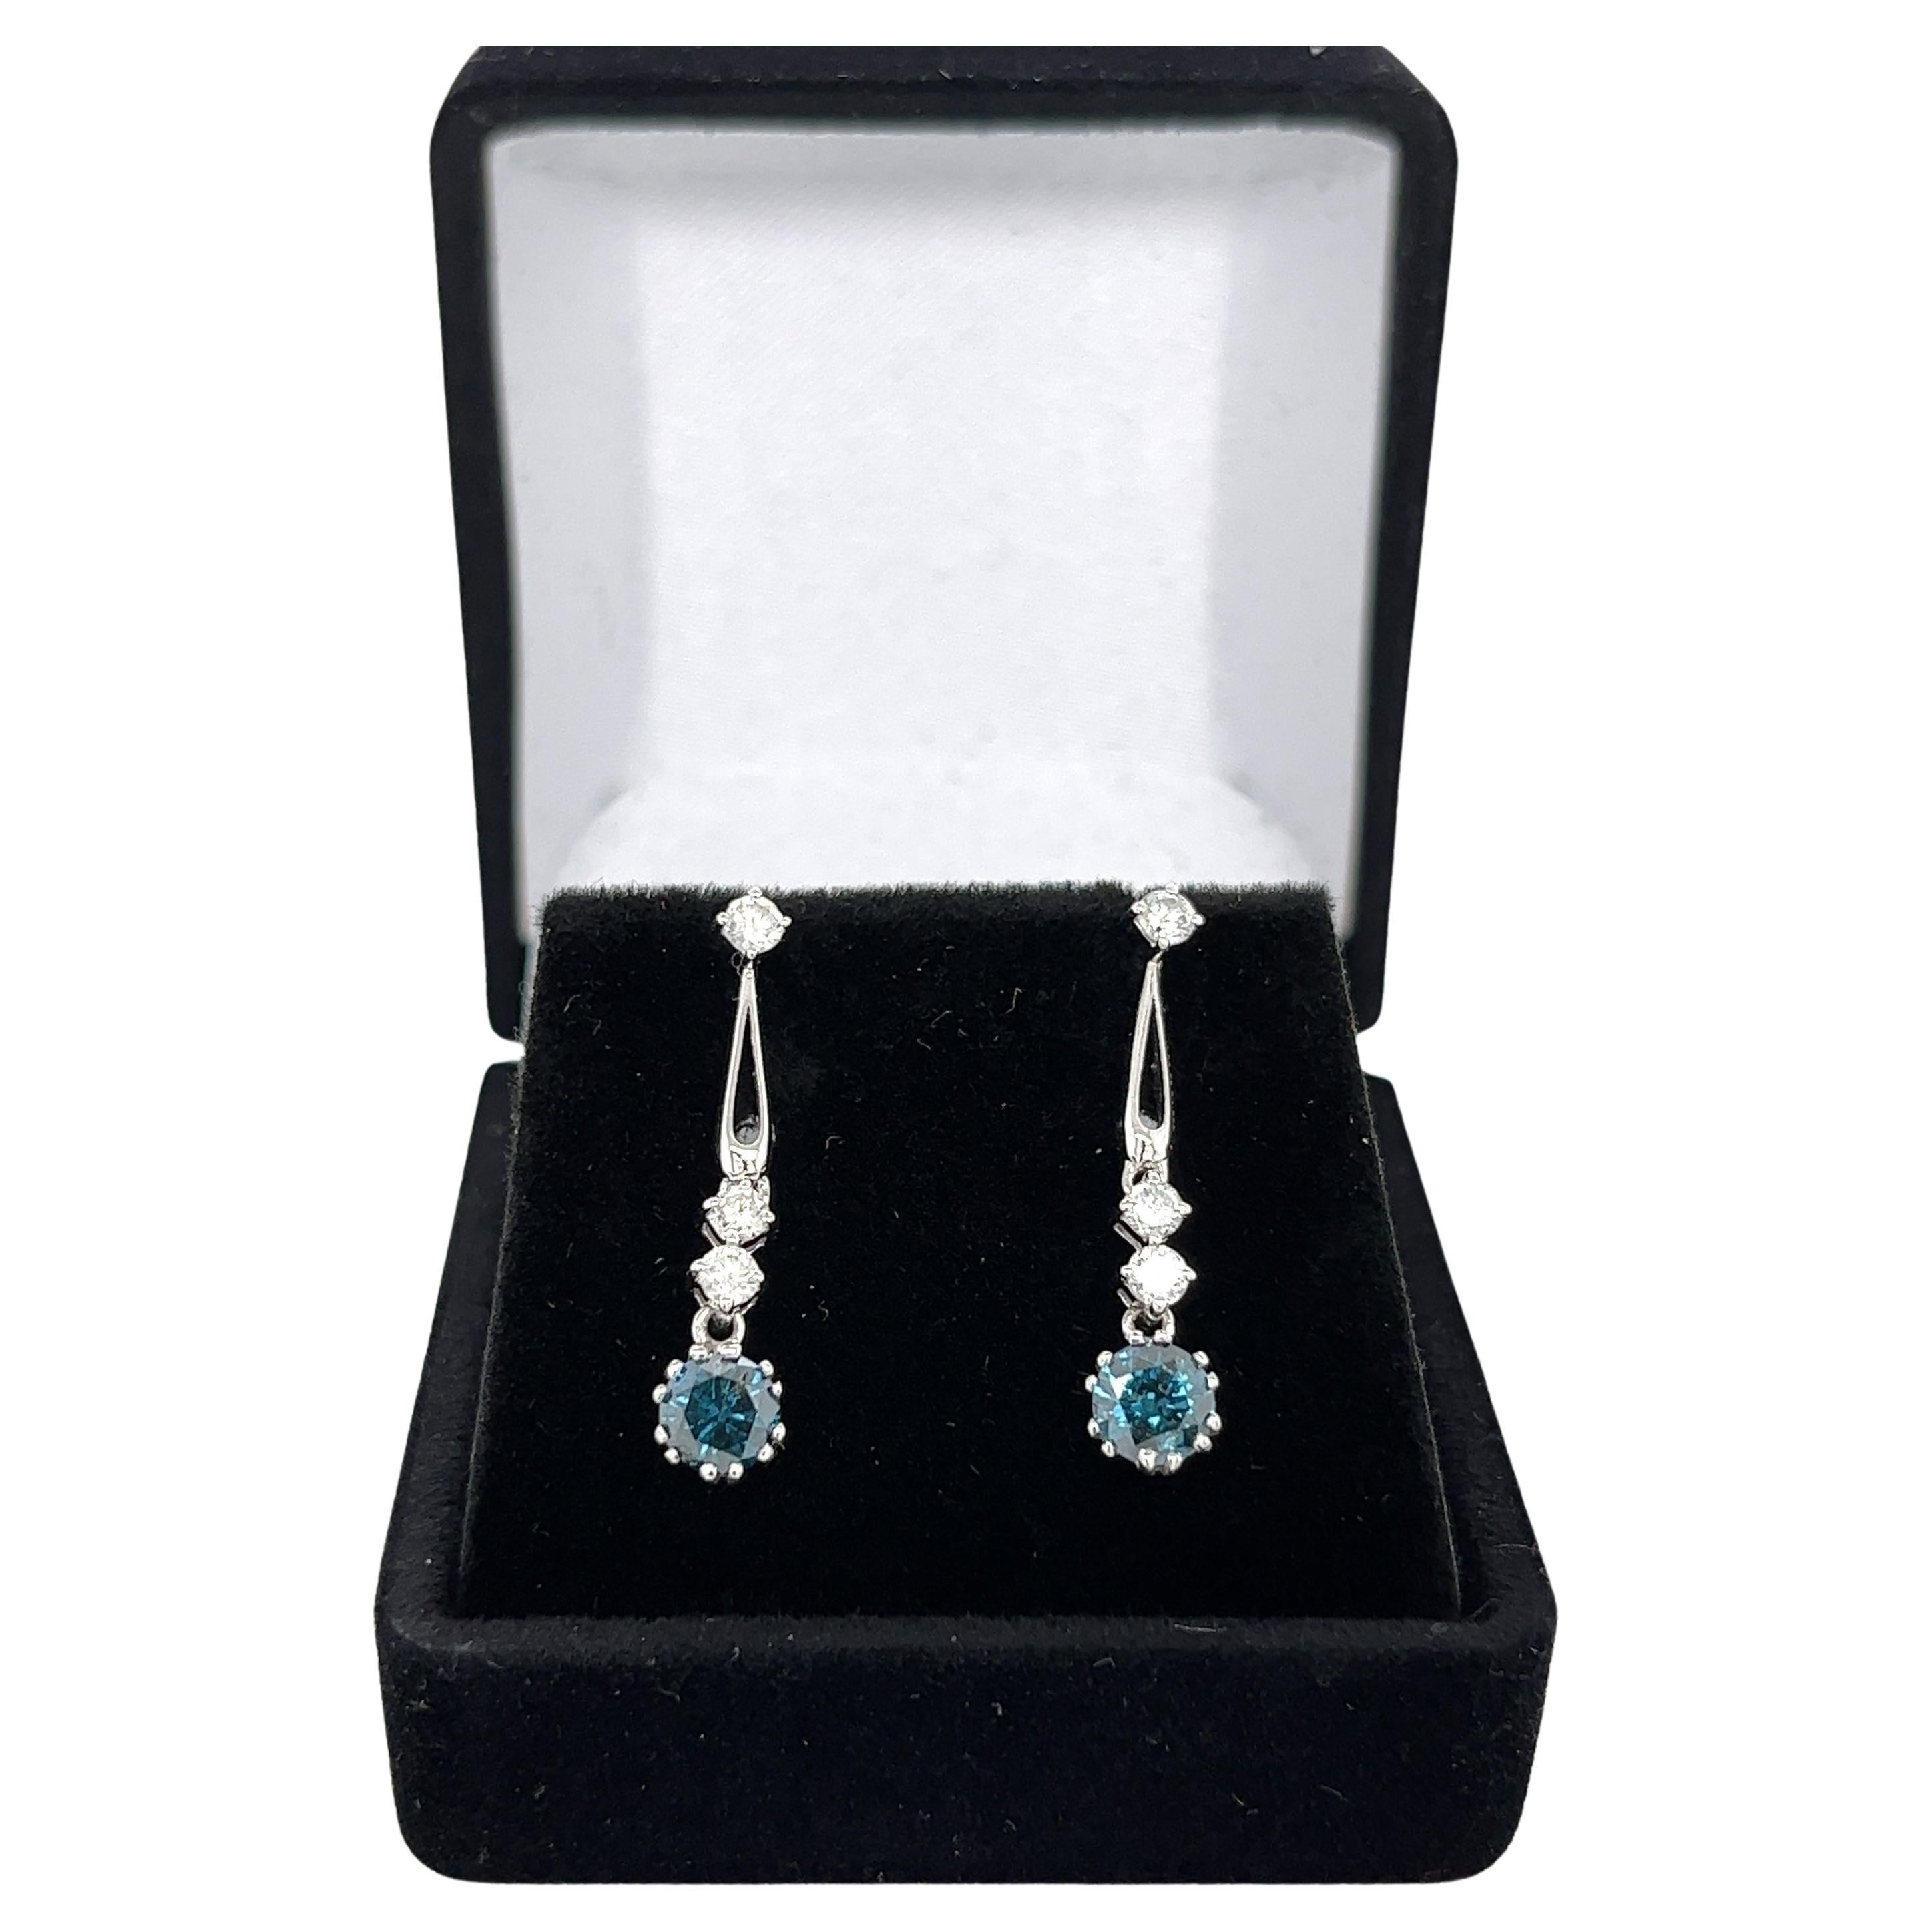 Natural blue and white diamond drop earrings set in 18 karat white gold and push-back closure. 

These earrings are the perfect balance of extravagance and minimalism. Shiny 18k white gold and sparkly natural diamonds that match any look and season.